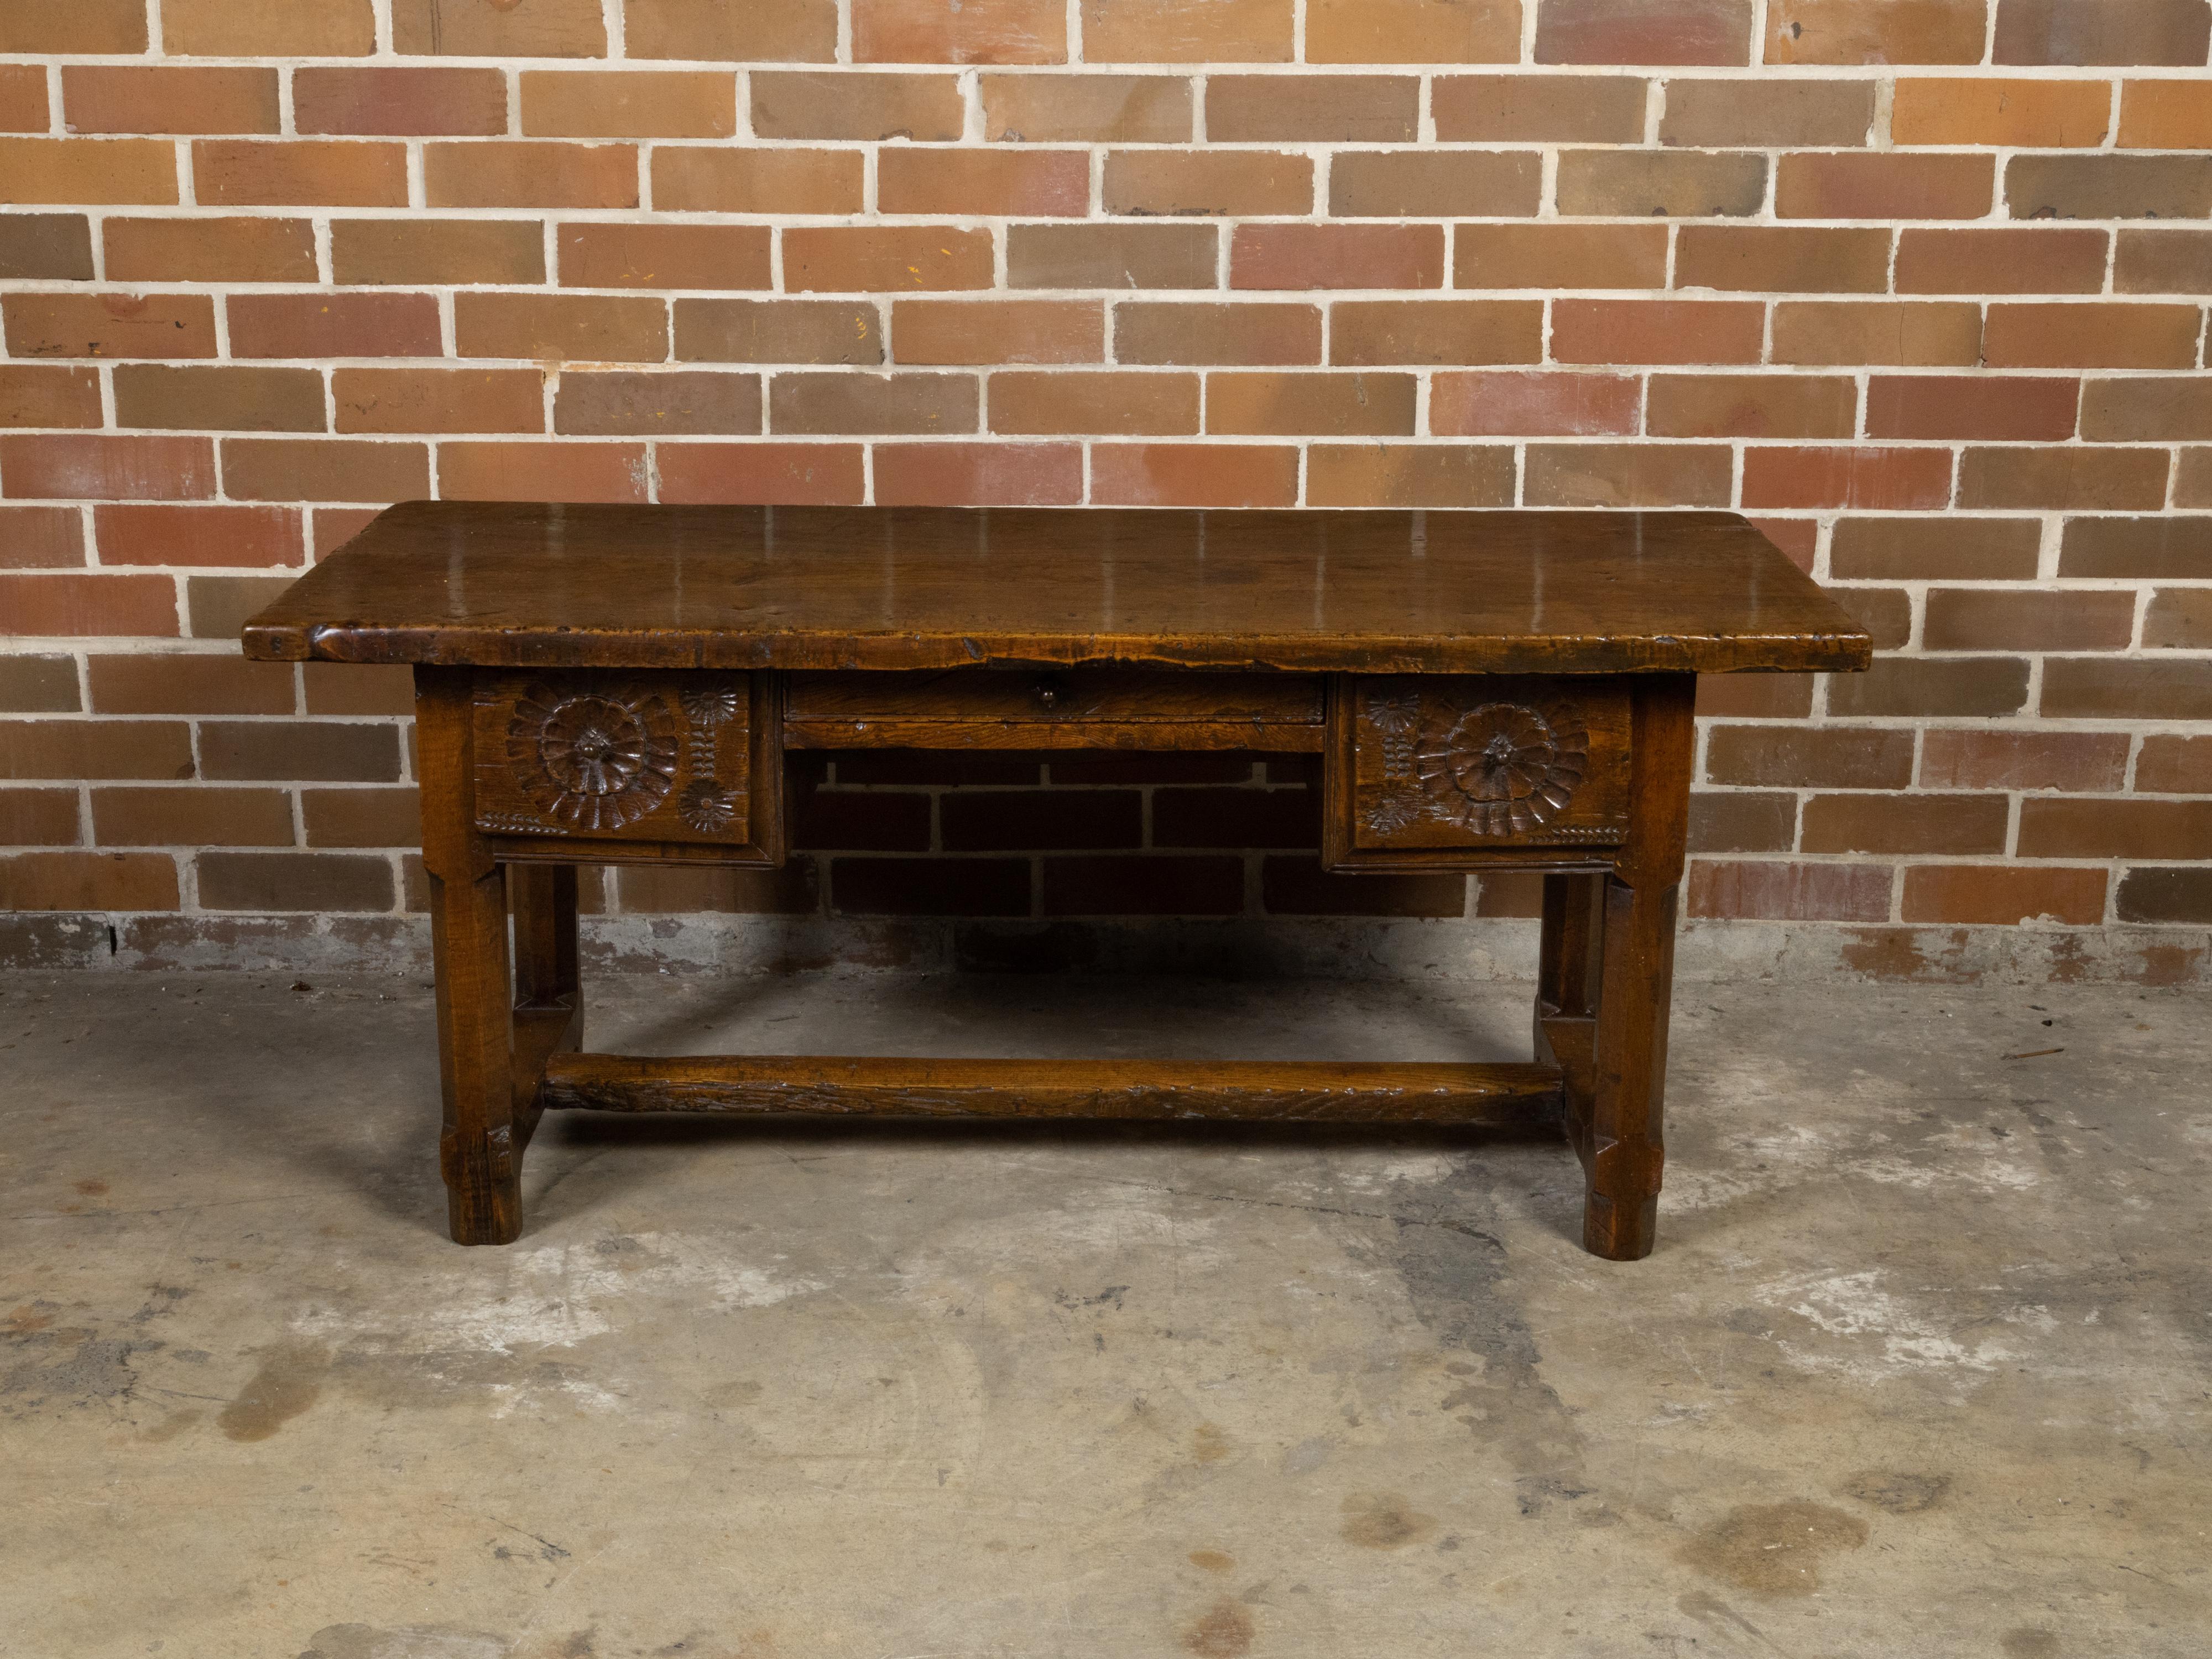 A French walnut desk from the early 19th century with three drawers, carved motifs, H-Form cross stretcher and nice patina. Created in France during the early years of the 19th century, this walnut desk features a rectangular top with nice aging and